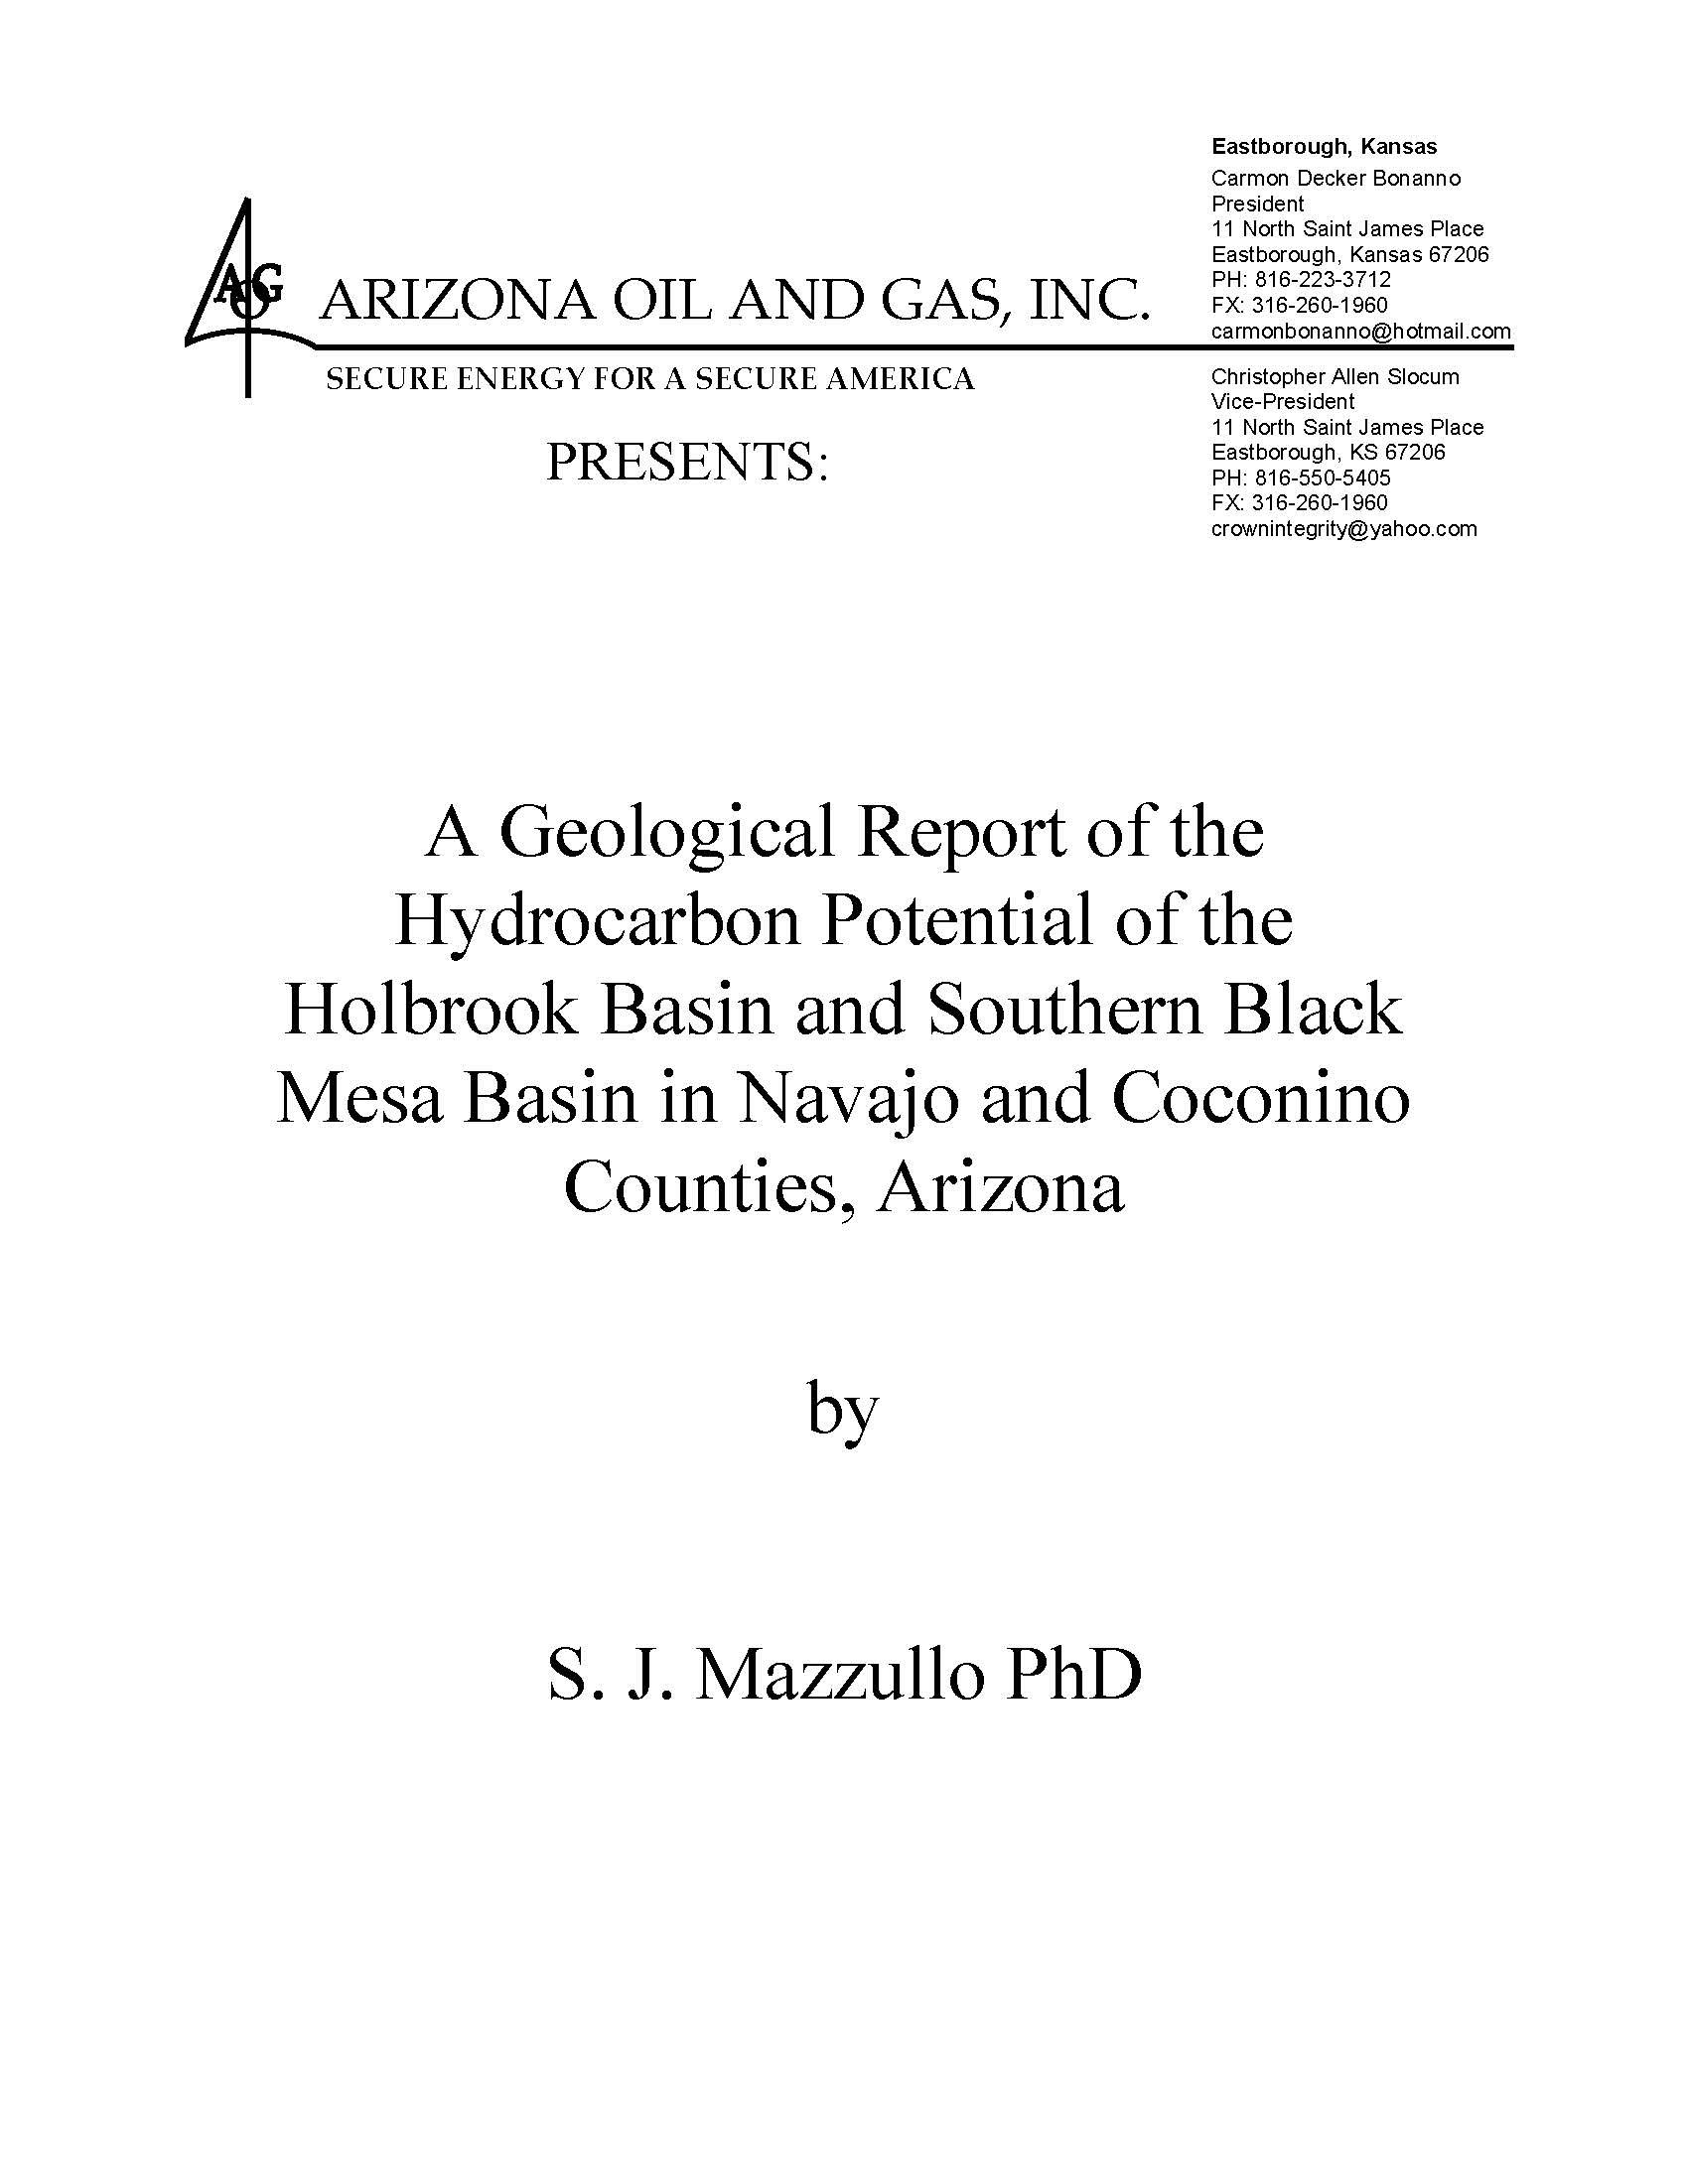 Holbrook Basin Petroleum Potential by S J Mazzullo